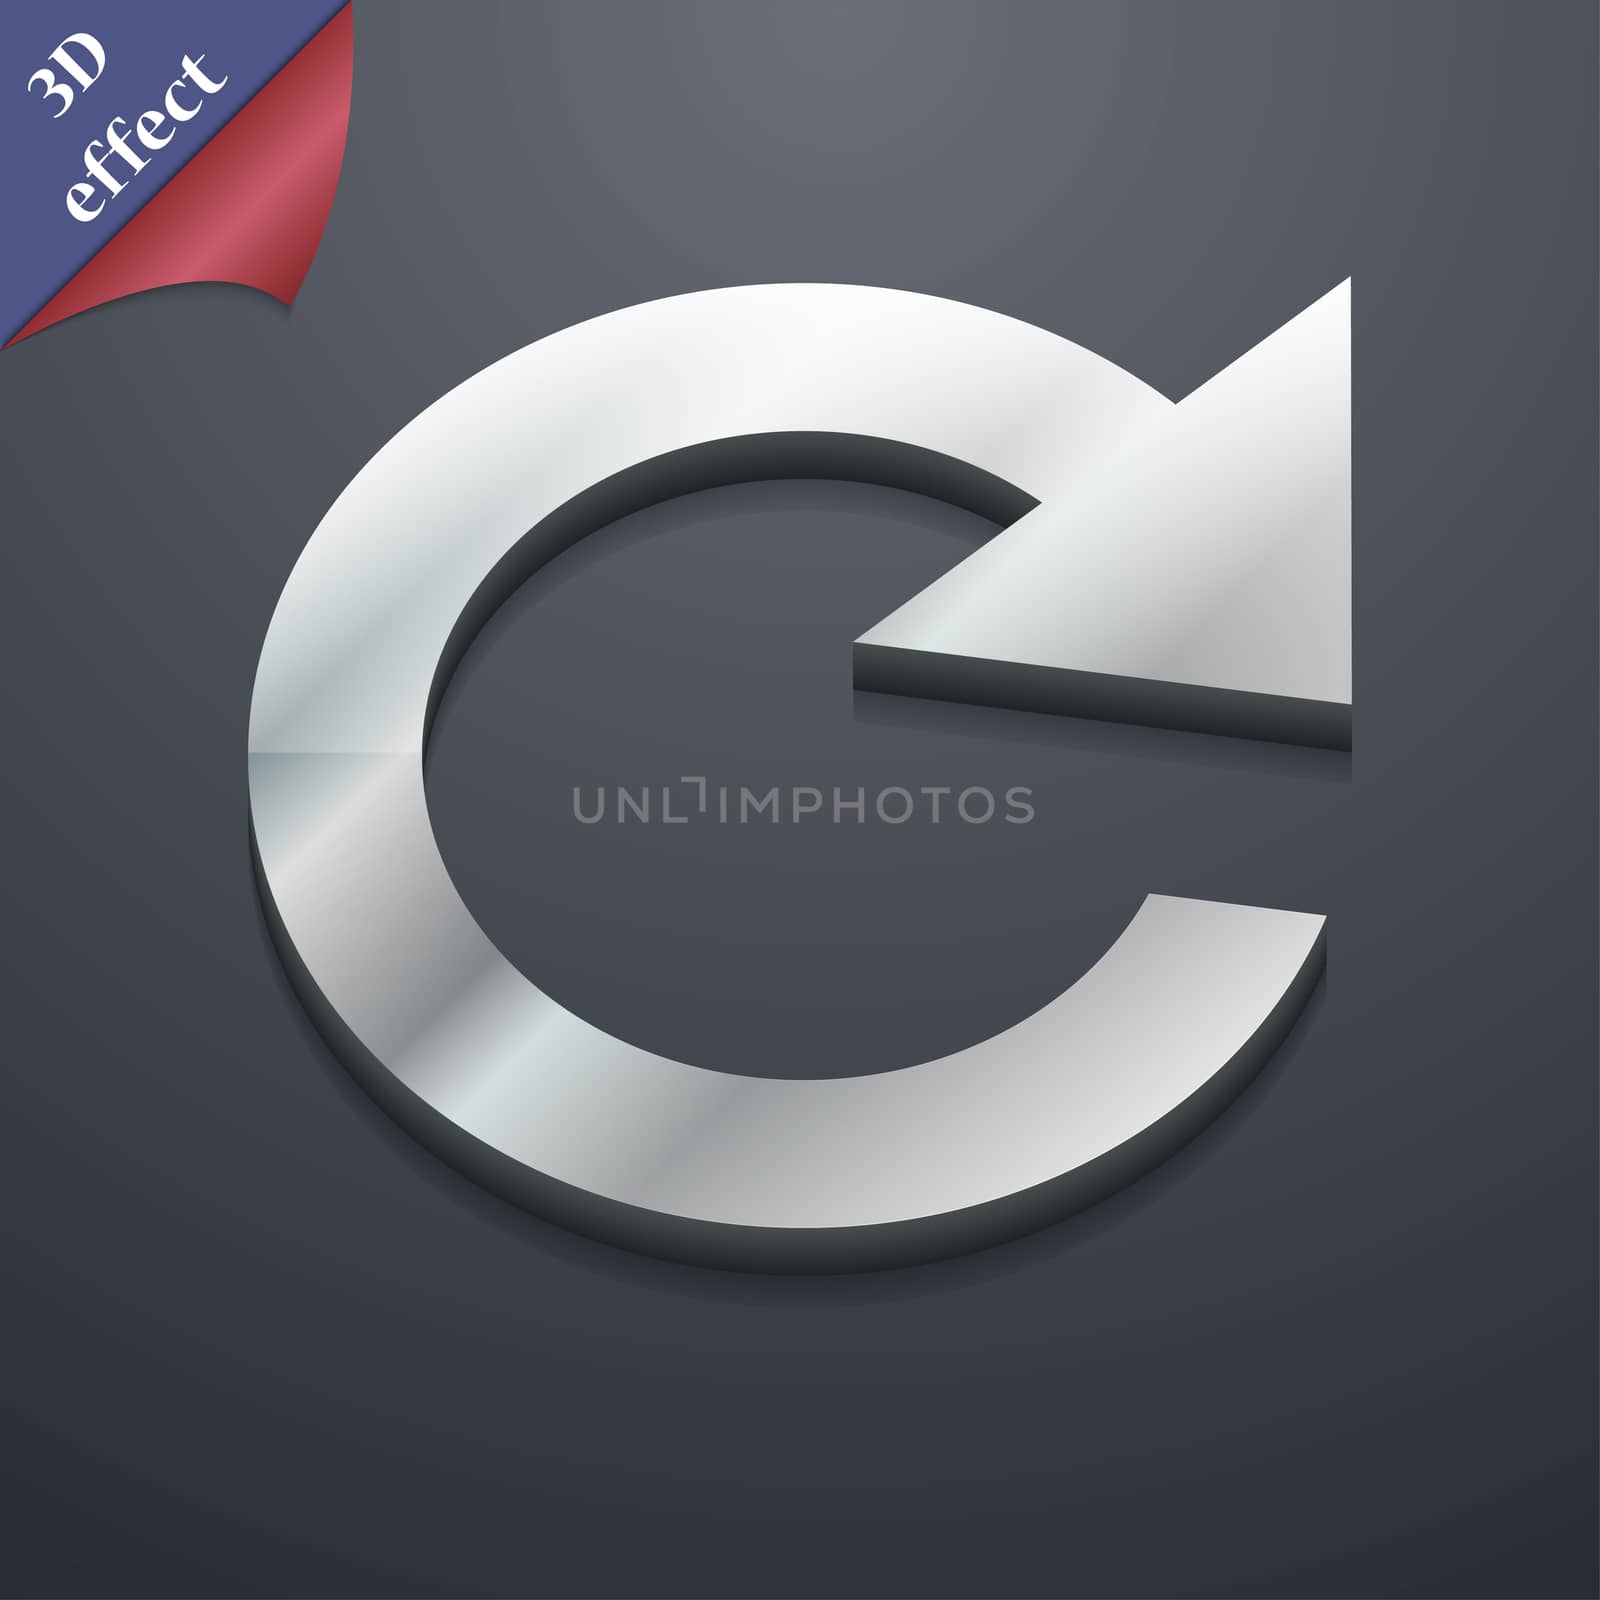 update icon symbol. 3D style. Trendy, modern design with space for your text illustration. Rastrized copy